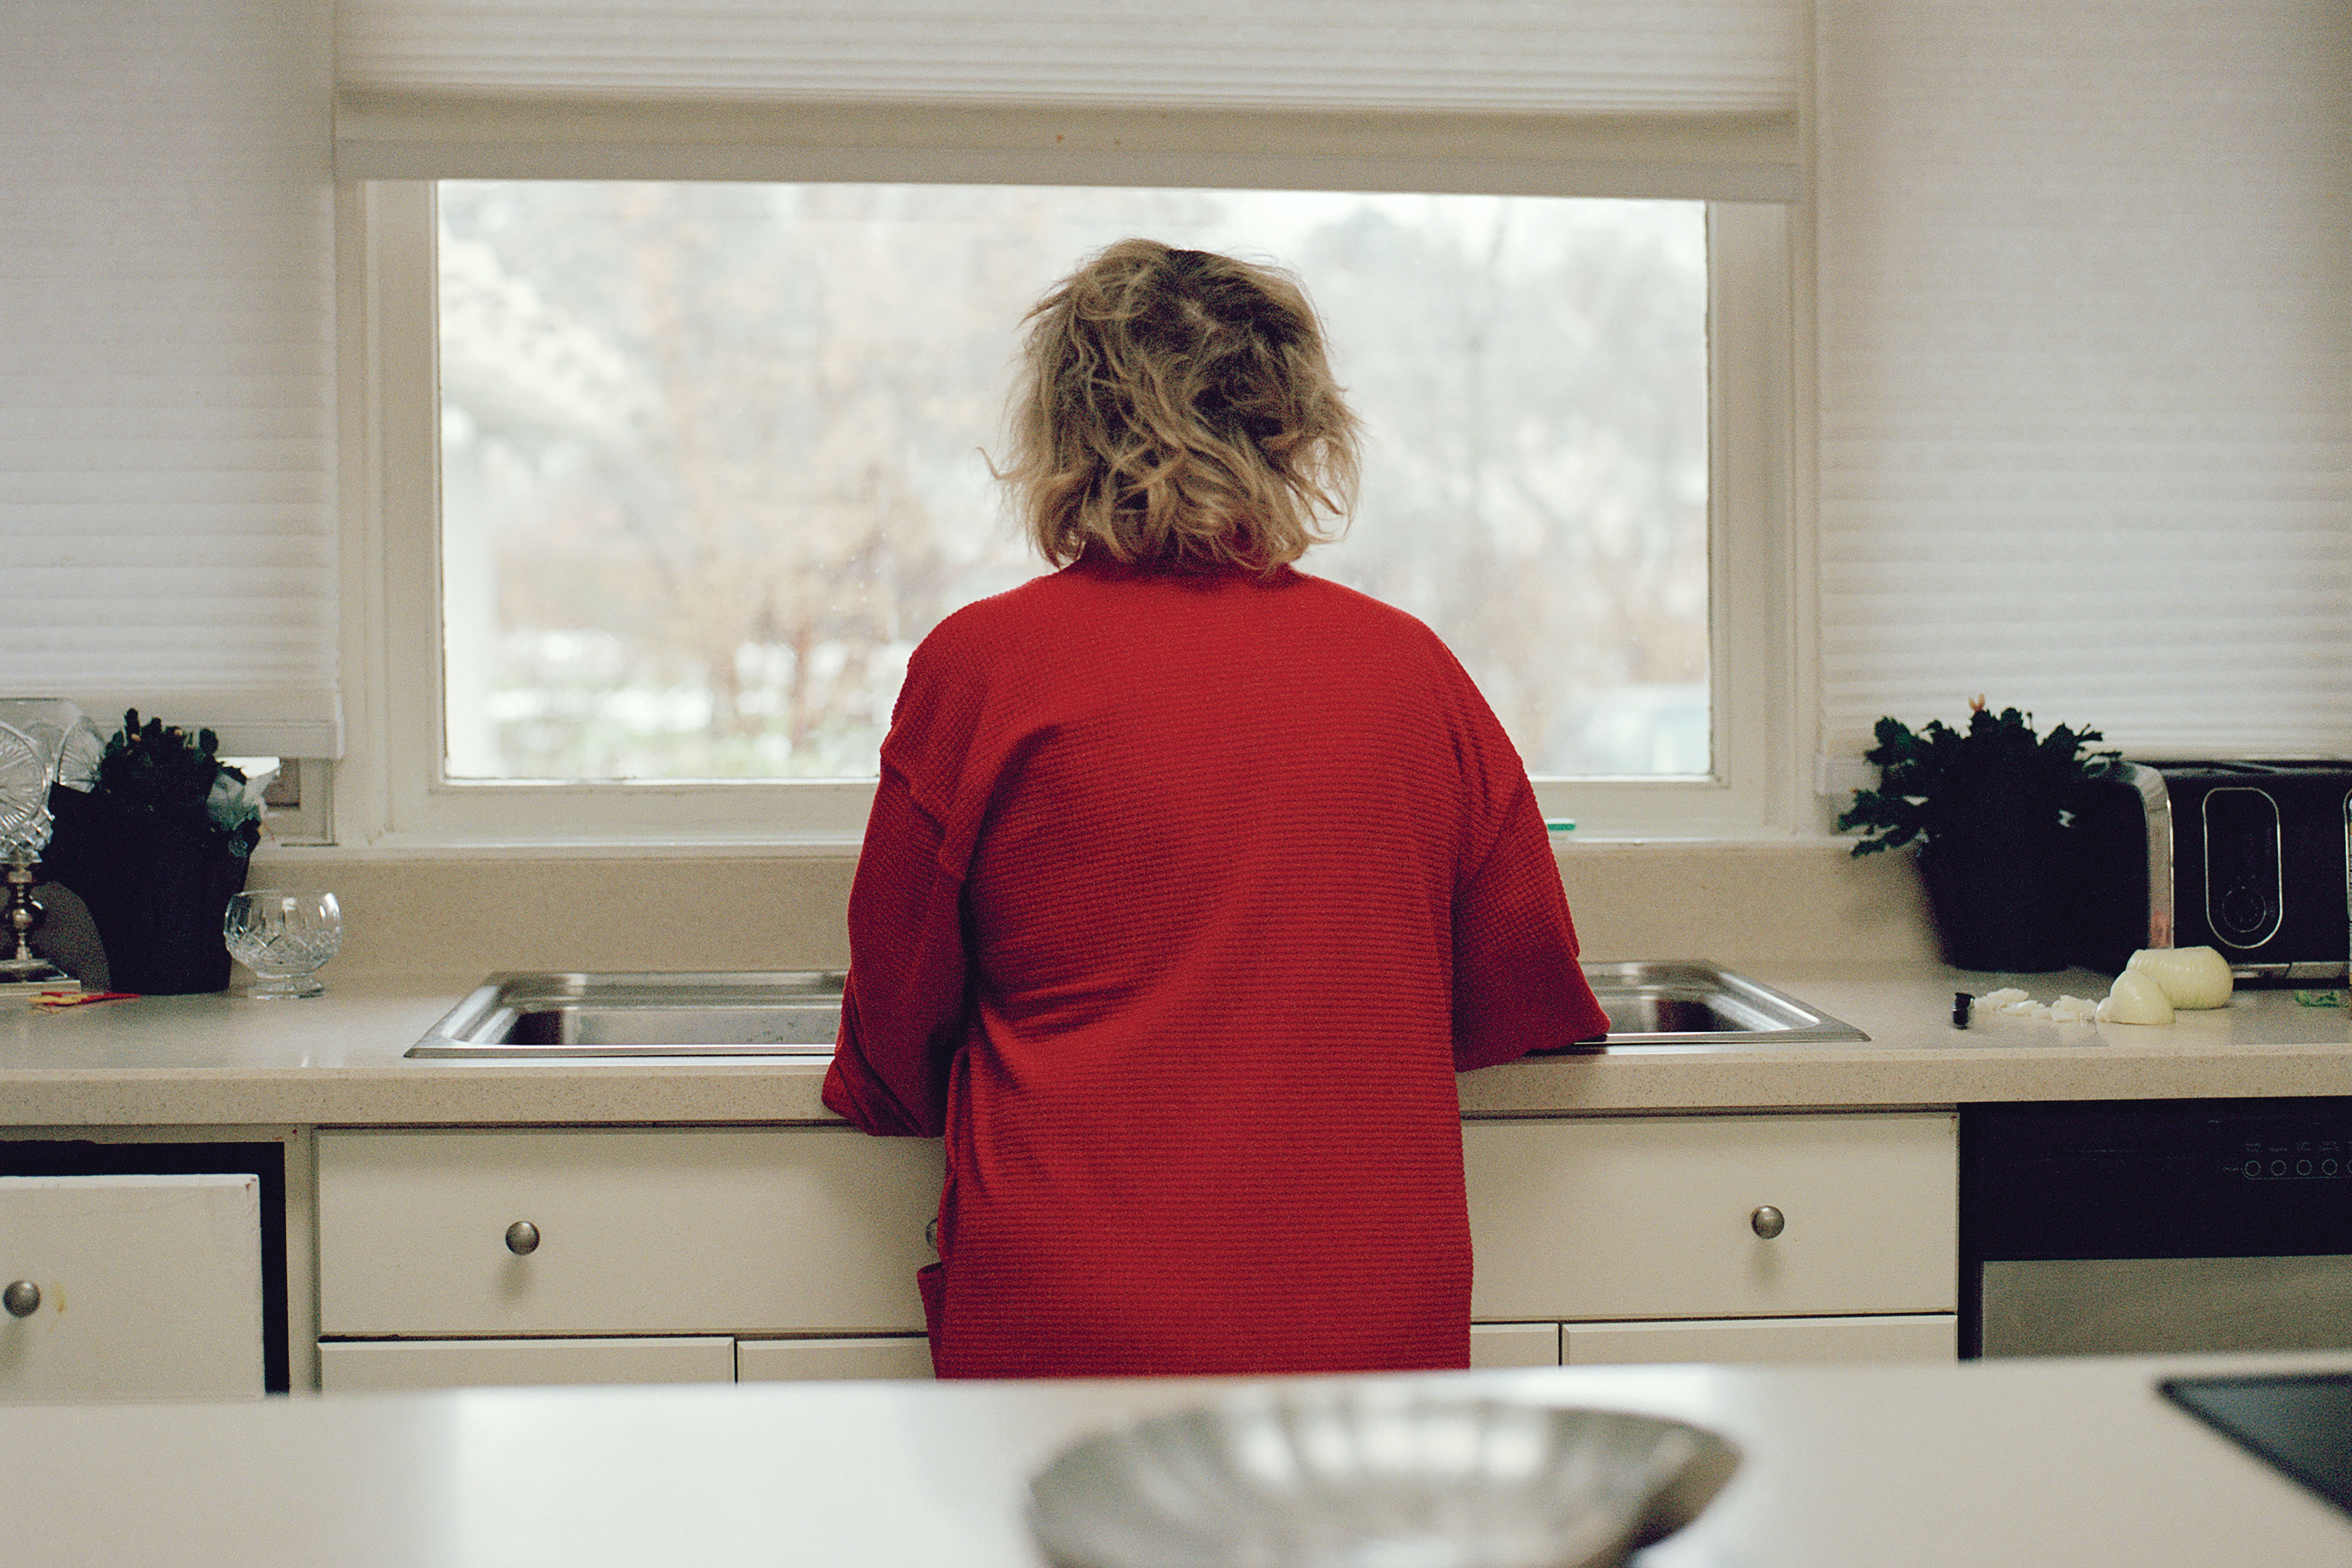 Photograph of a person wearing a red sweater while looking out of a kitchen window. The photo is taken from behind the person.